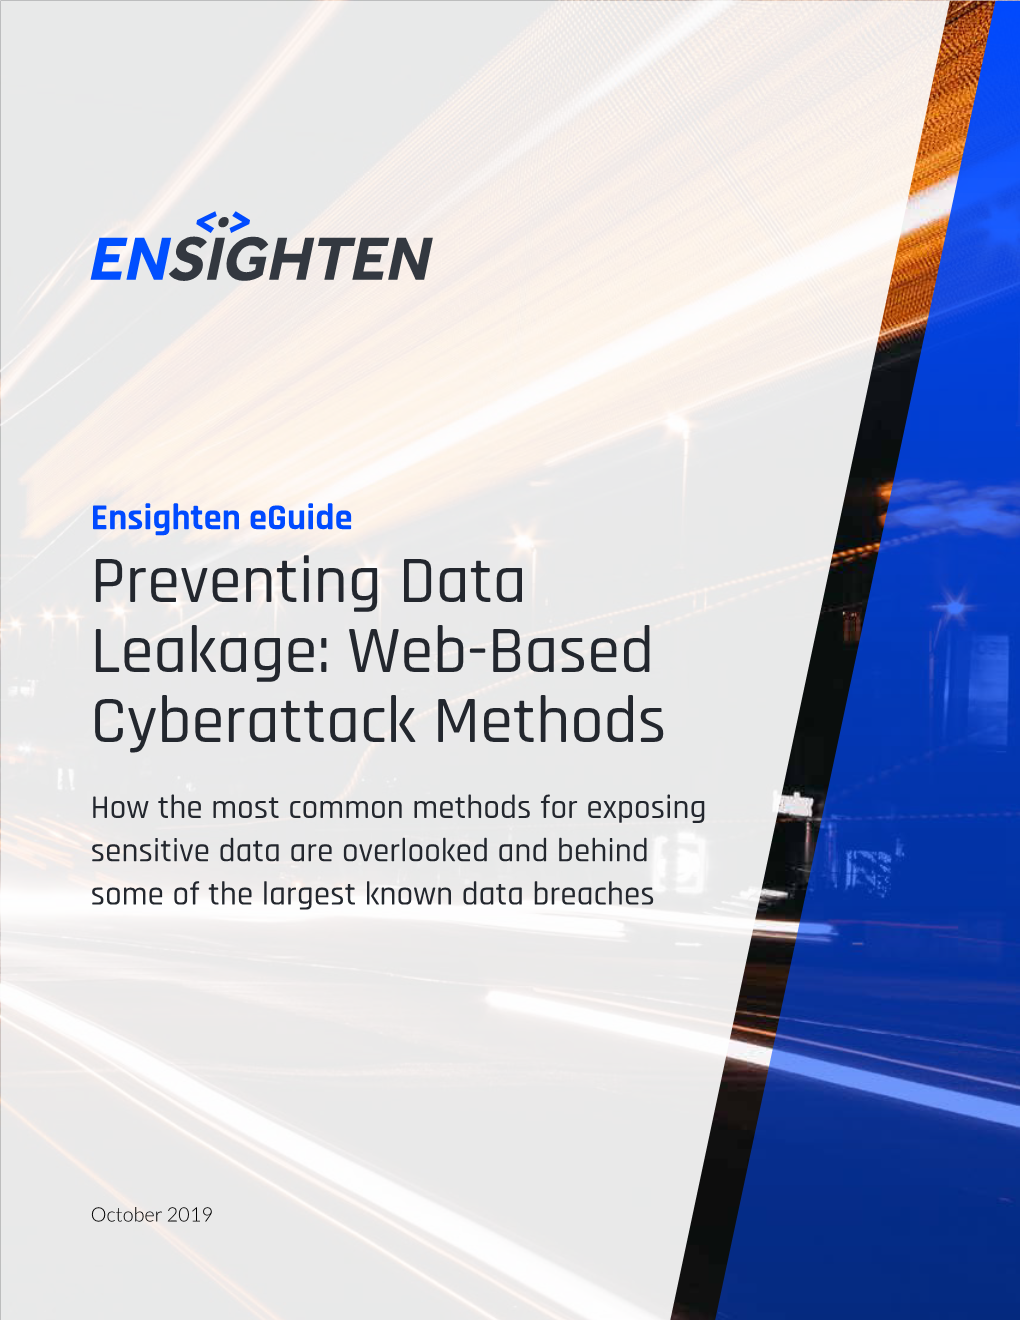 Web-Based Cyberattack Methods How the Most Common Methods for Exposing Sensitive Data Are Overlooked and Behind Some of the Largest Known Data Breaches